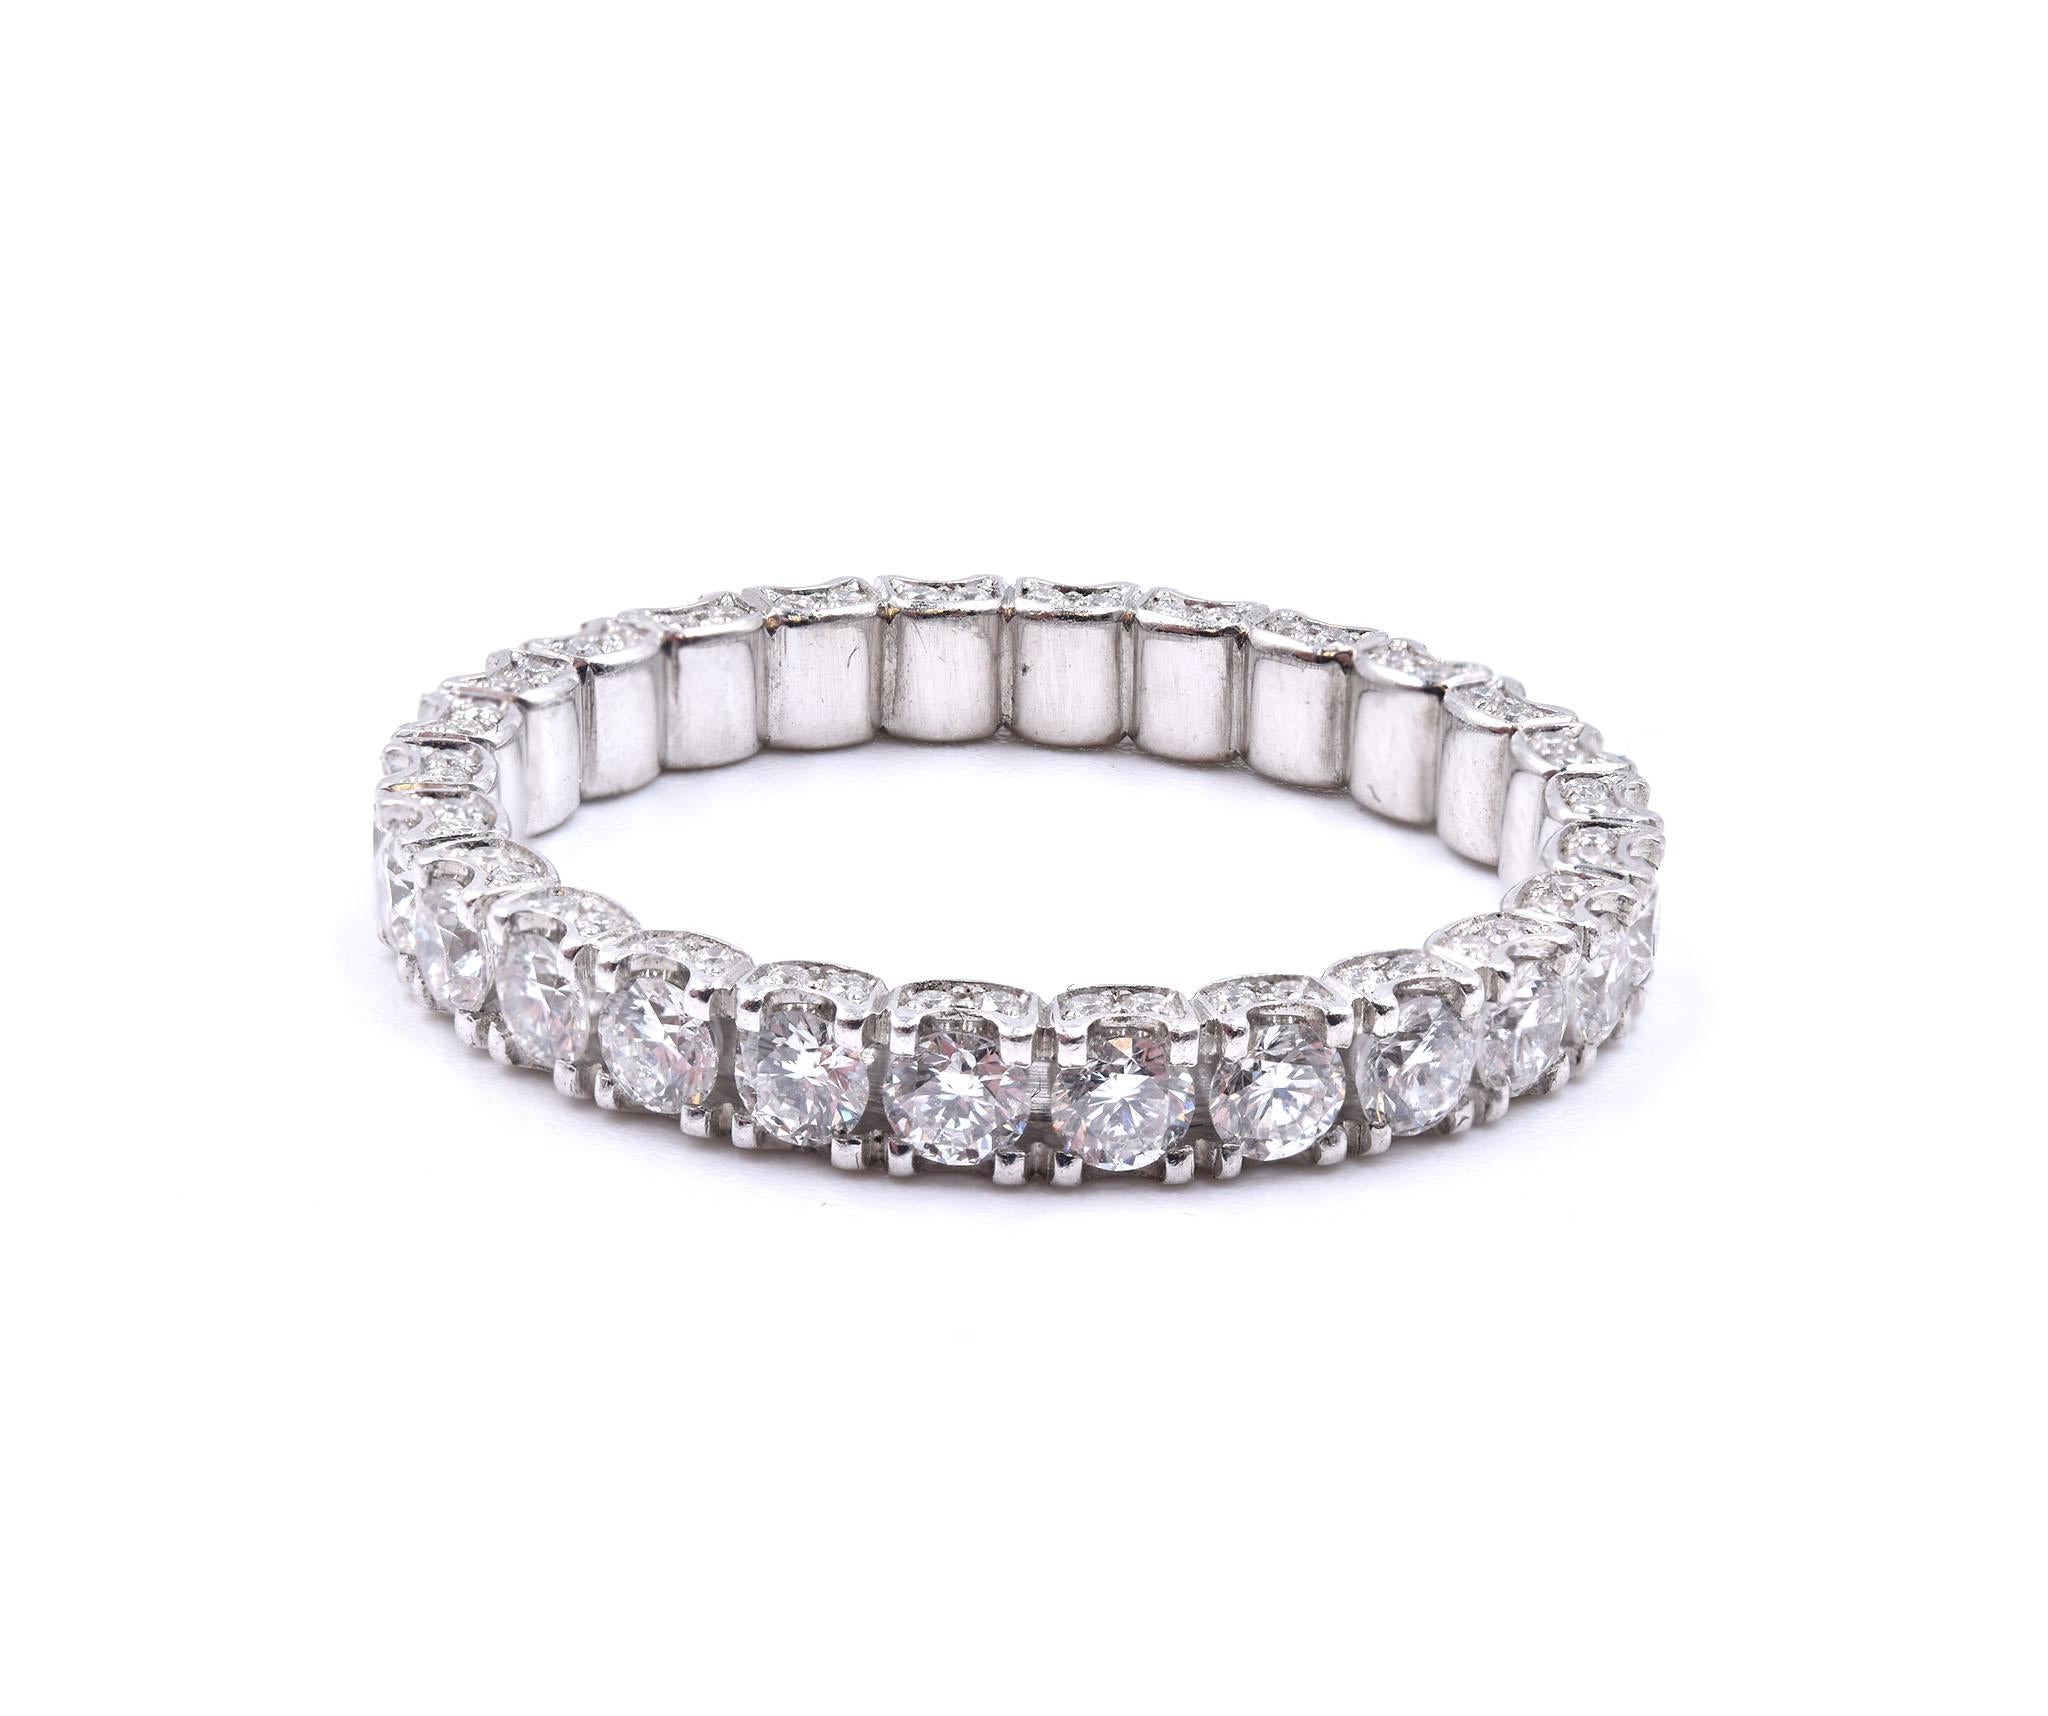 Material: Platinum
Diamonds: 26 round brilliant cut = 1.04cttw
Color: G 
Clarity: VS1
Diamonds: 104 round cut = .54cttw
Color: G 
Clarity: VS
Ring Size: 6 (please allow up to 2 additional business days for sizing requests)
Dimensions: band measures